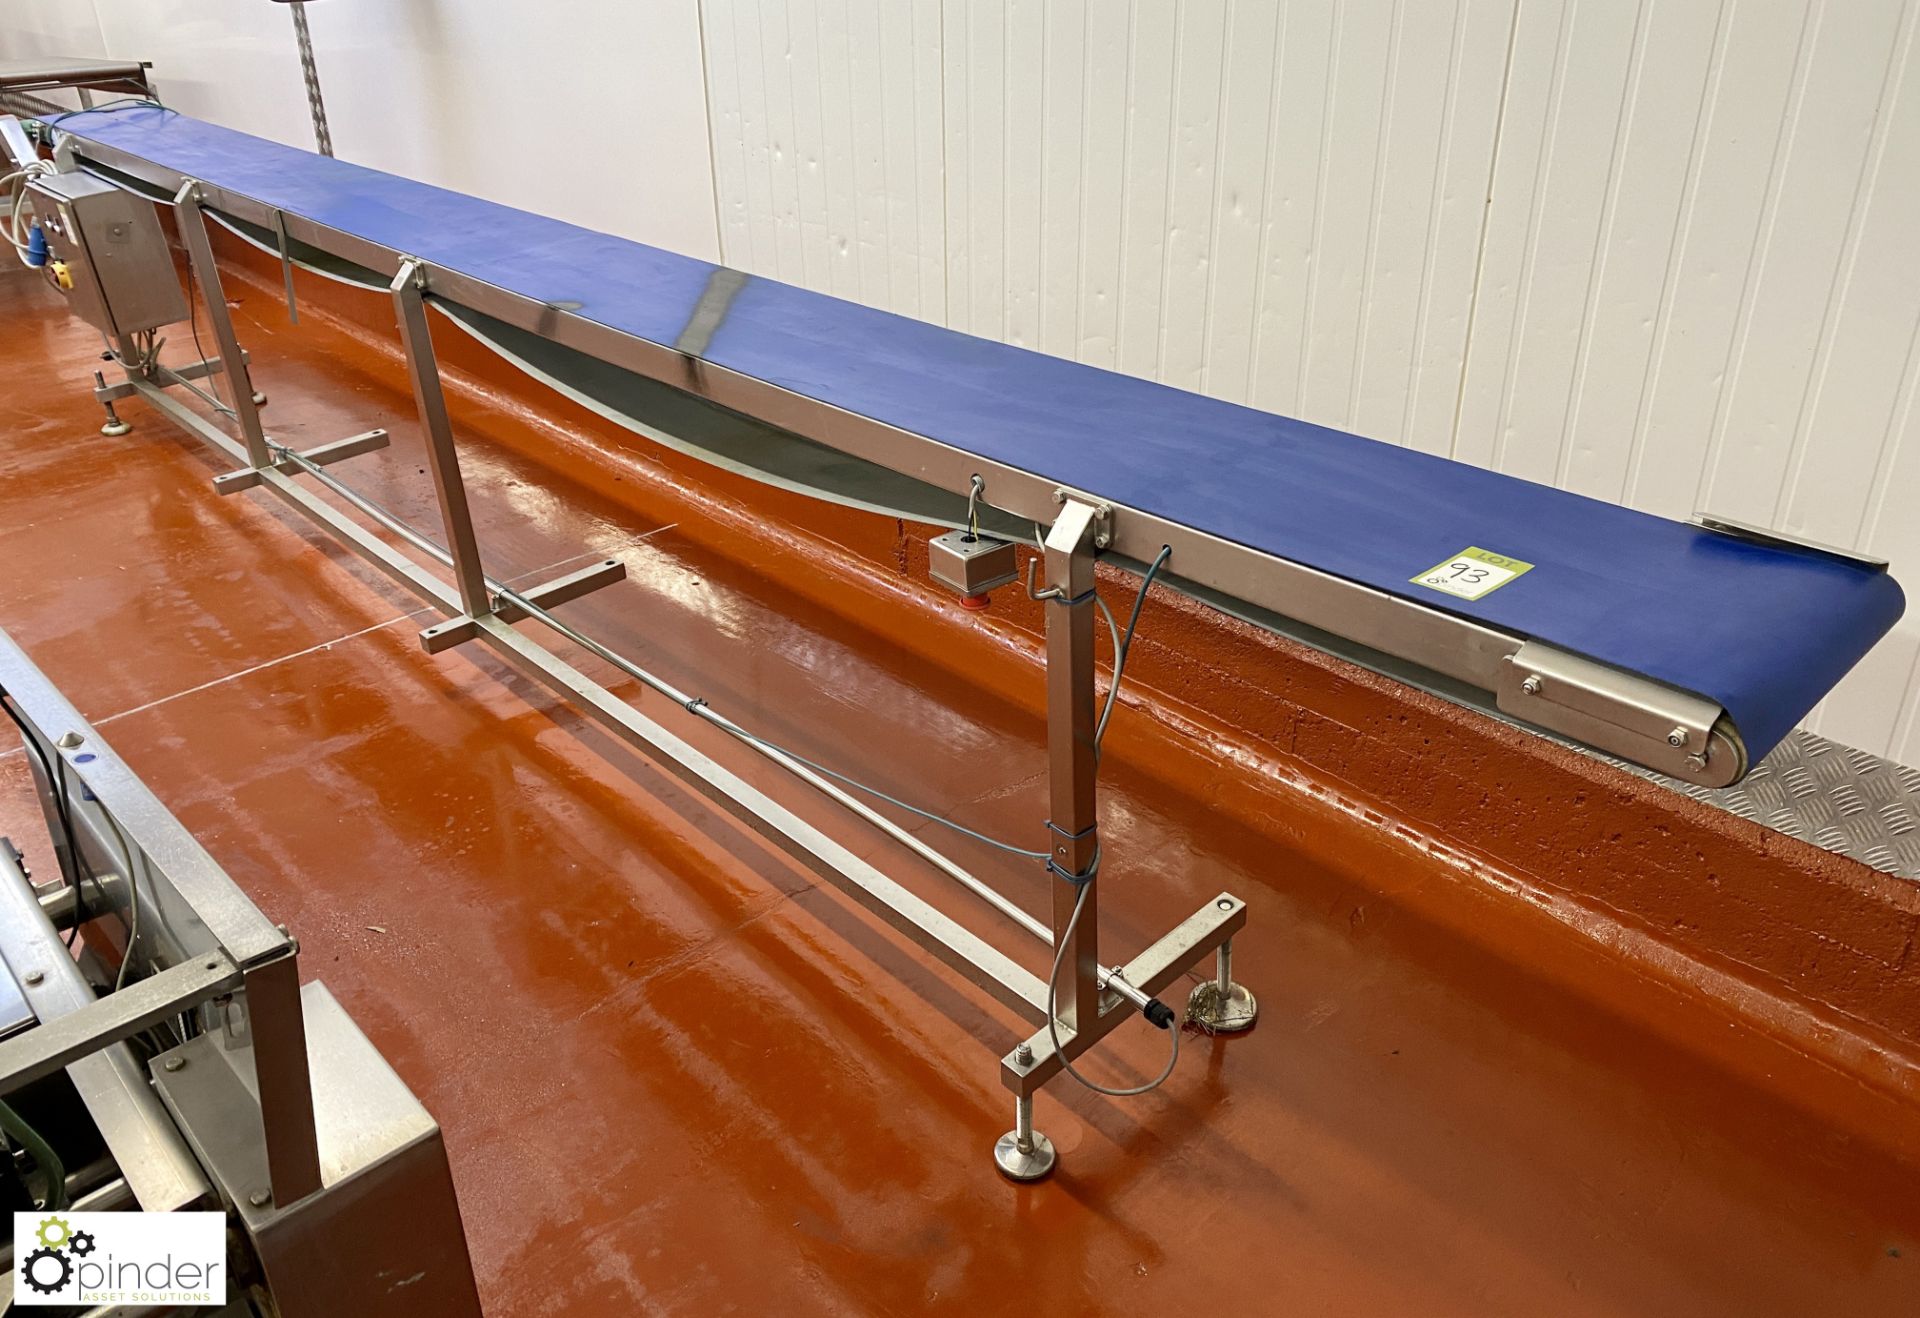 Stainless steel Belt Conveyor, 4950mm x 310mm, 240volts (Lift Out Fee: £30 plus VAT) - Image 5 of 6